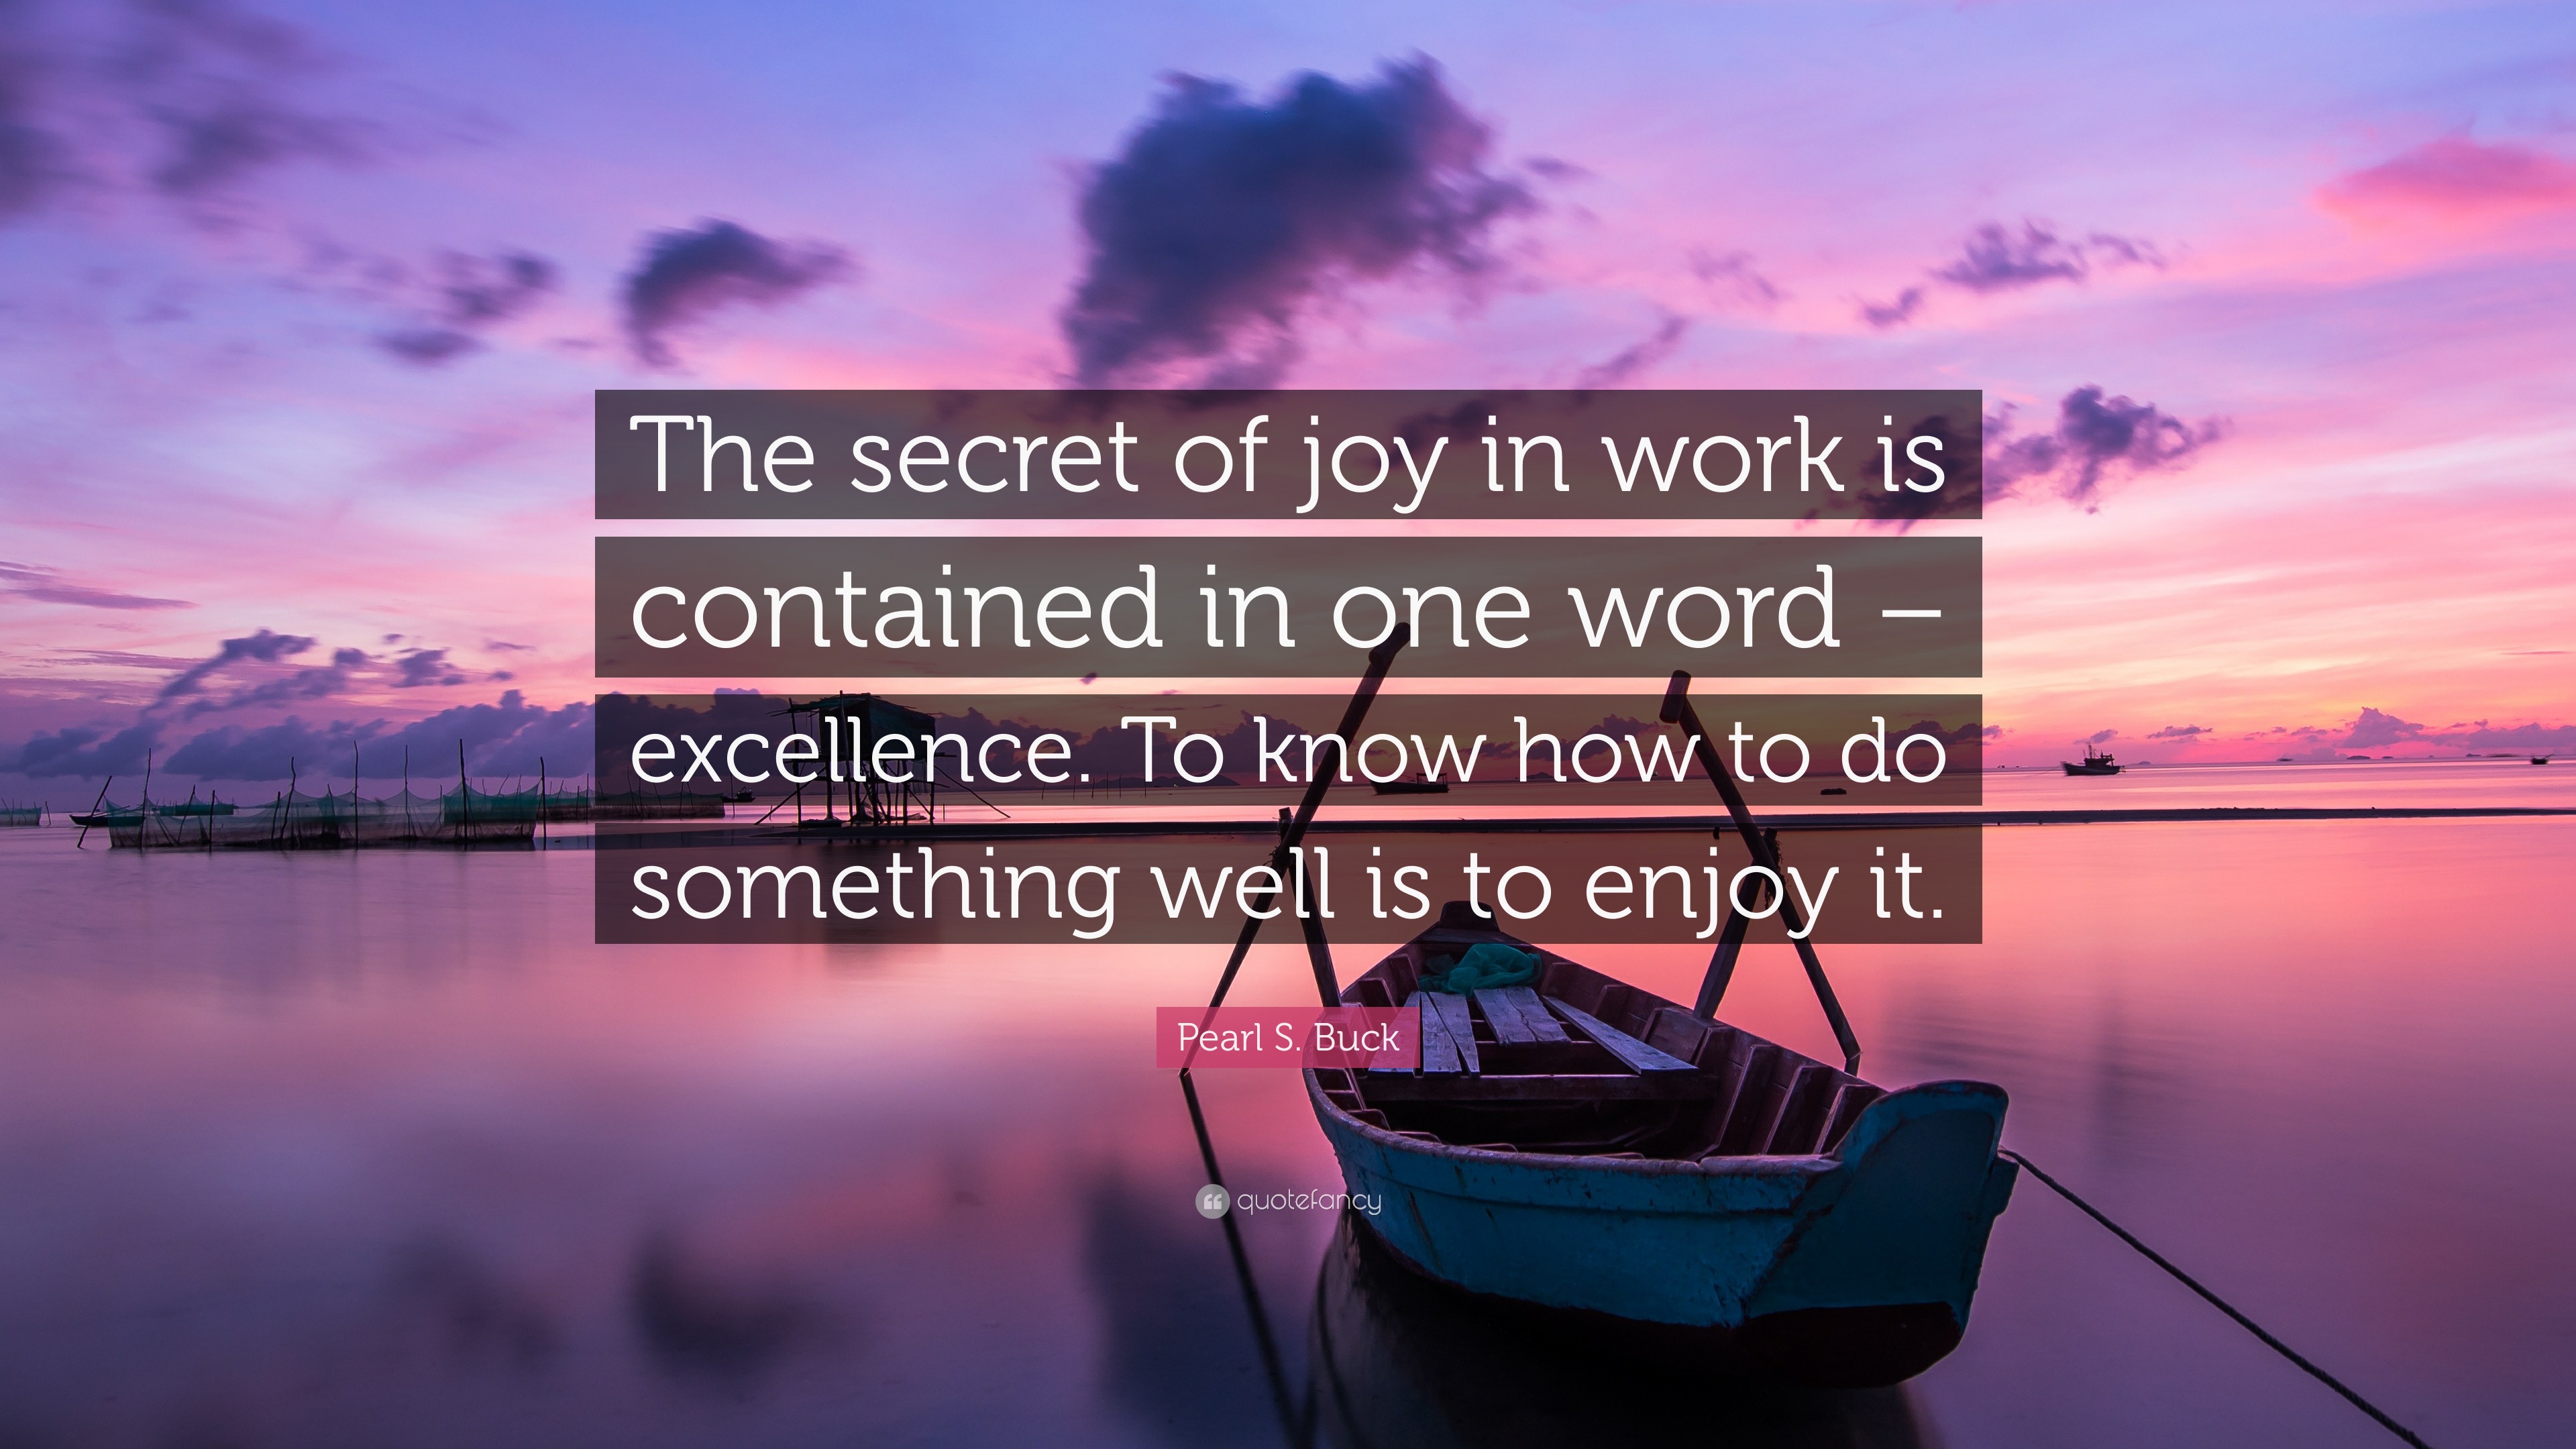 Pearl S. Buck Quote: “The secret of joy in work is contained in one ...